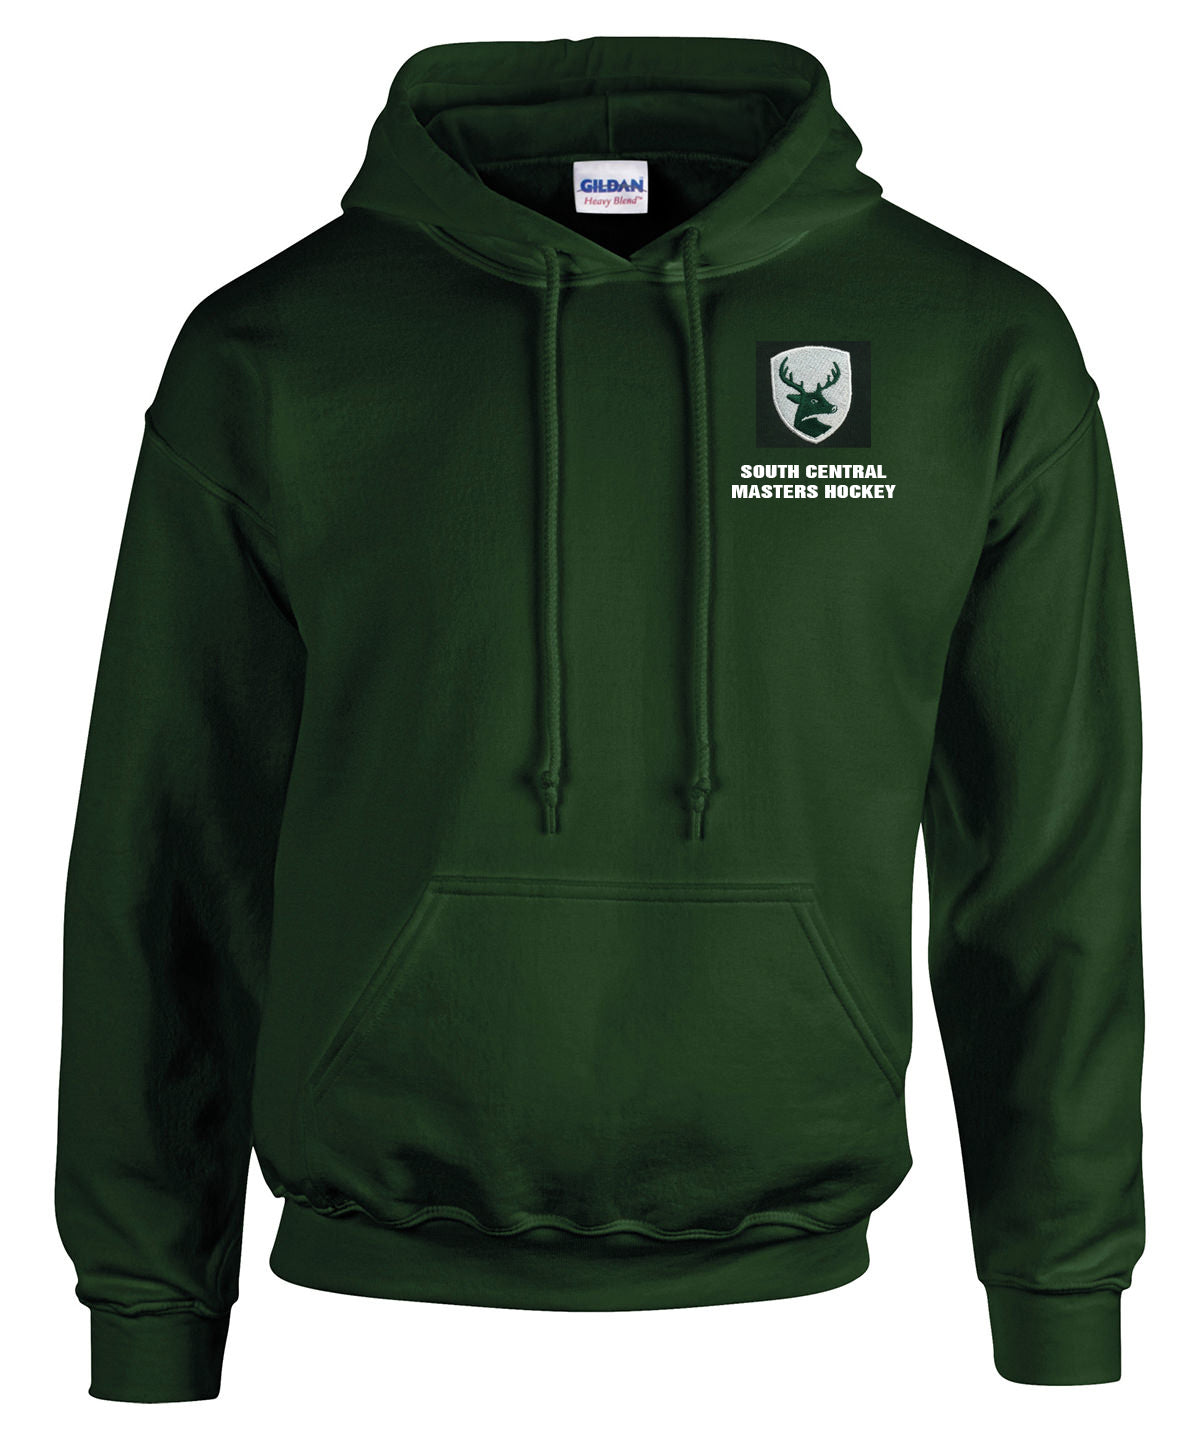 South Central Masters Hockey Hoodie